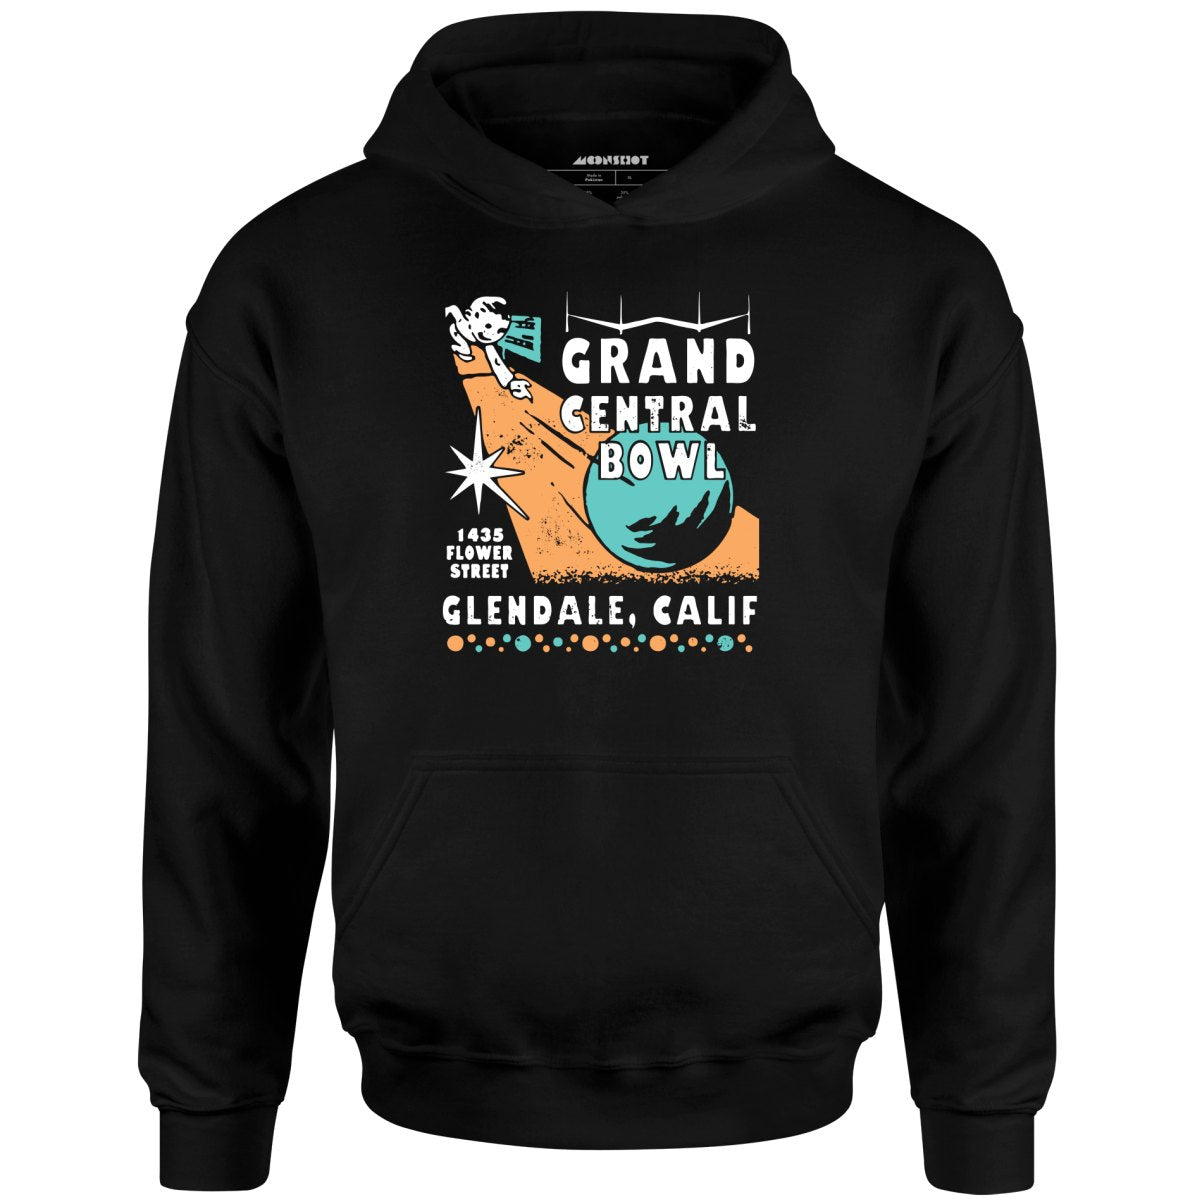 Grand Central Bowl - Glendale, CA - Vintage Bowling Alley - Unisex Hoodie